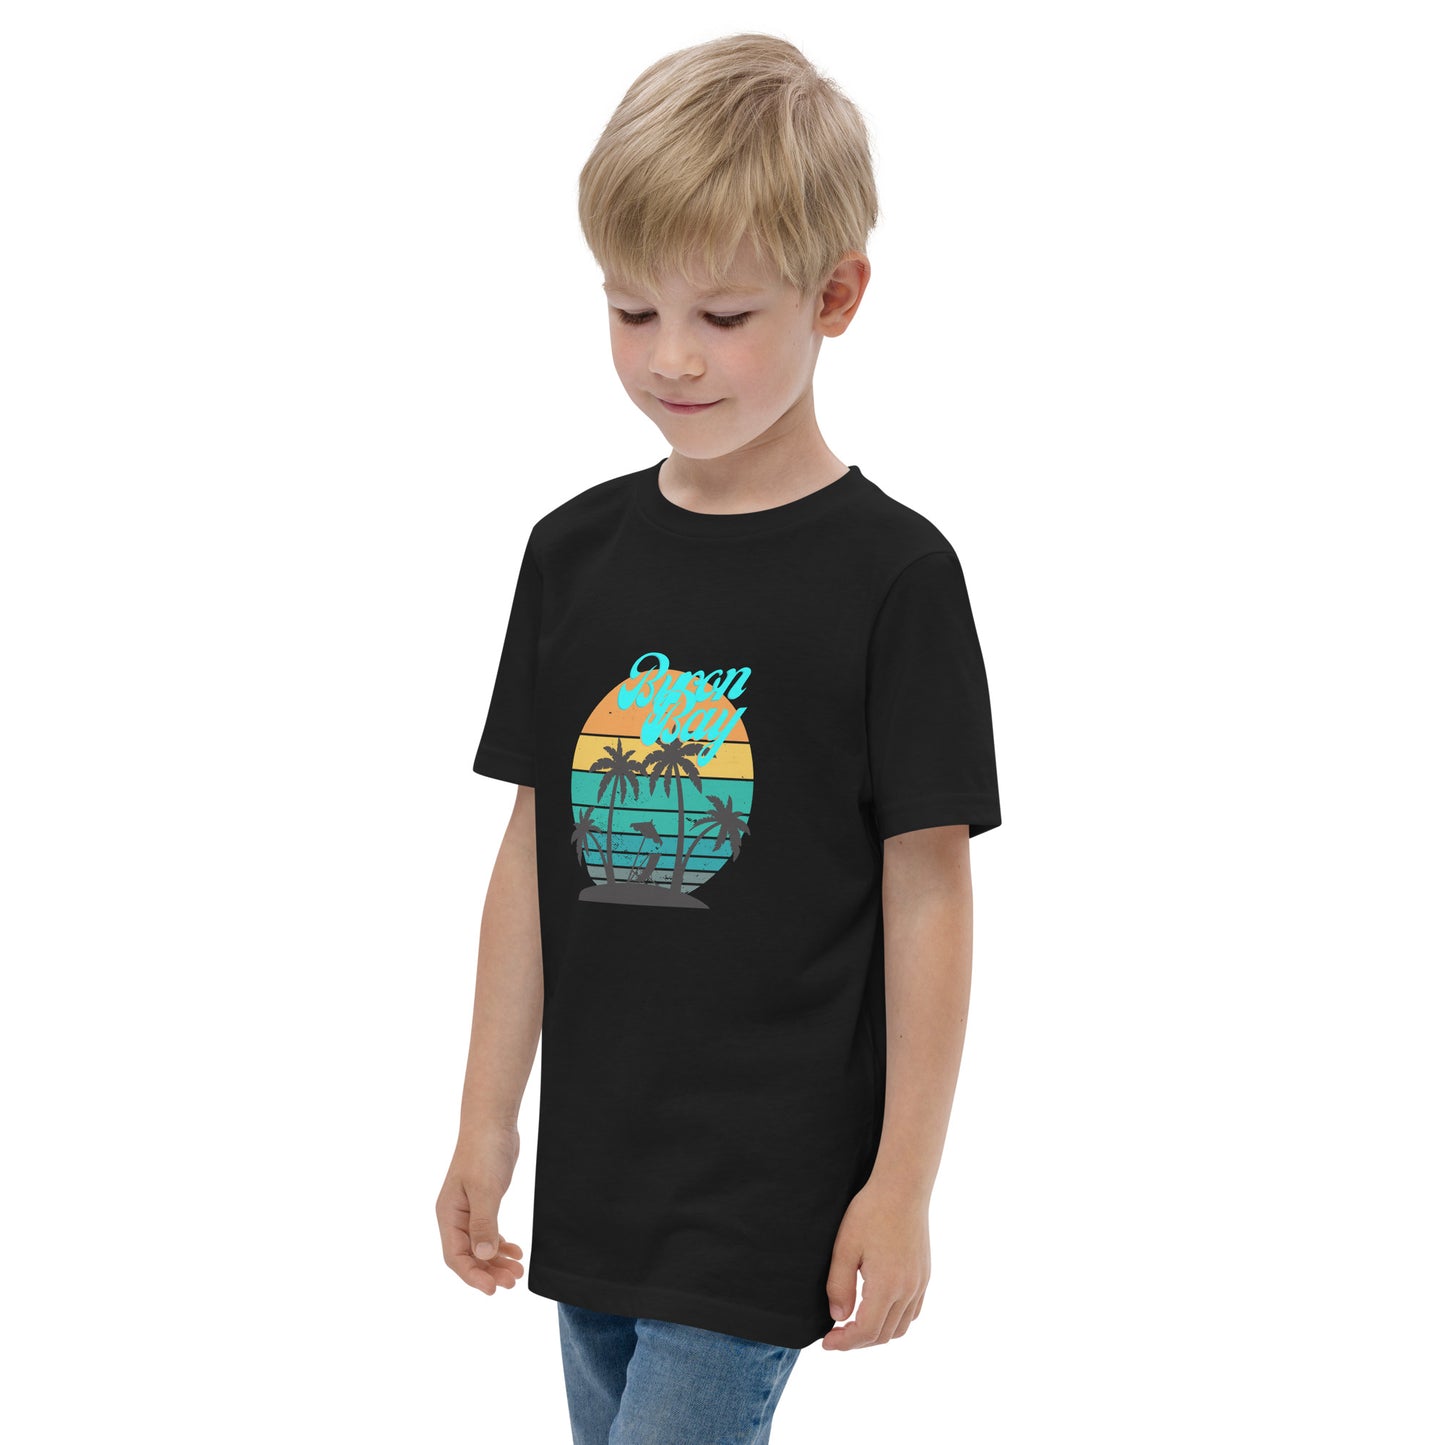  Kids T-Shirt - Black  - Side view, being warn on boy standing with his arms by his side - Byron Bay design on front - Genuine Byron Bay Merchandise | Produced by Go Sea Kayak Byron Bay 